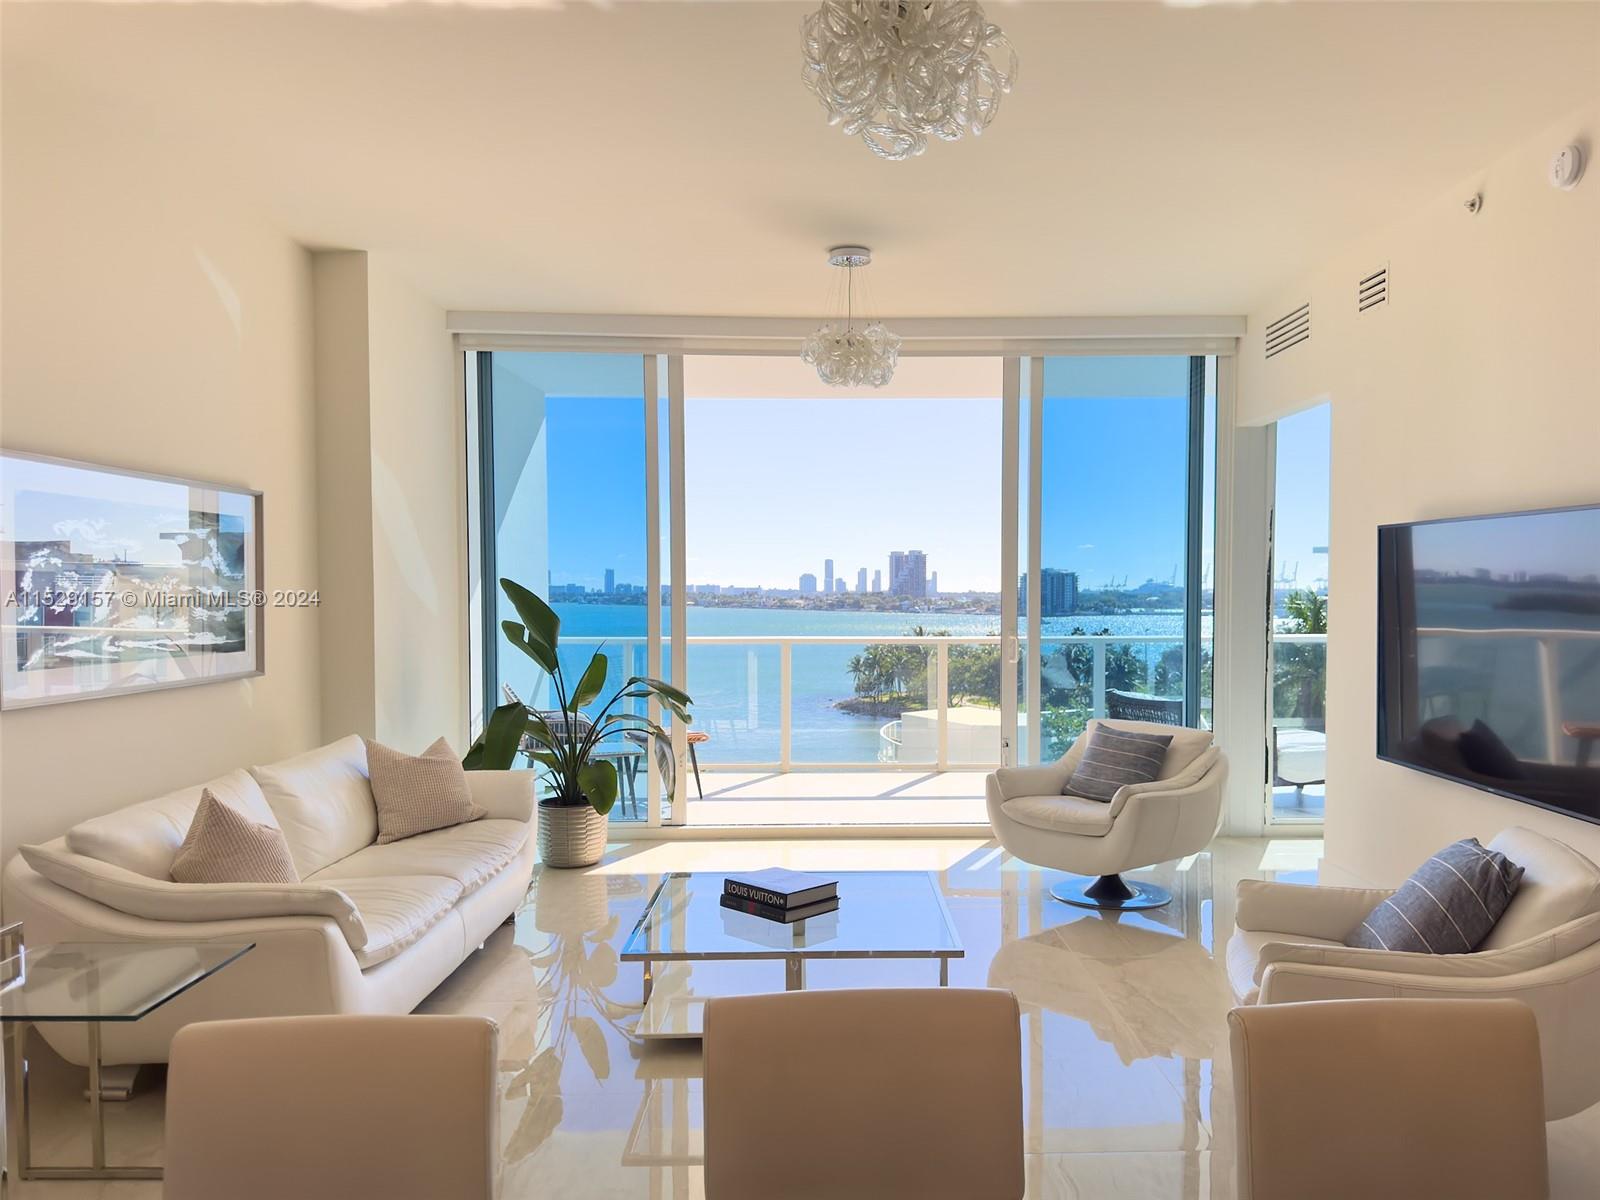 Stunning 2-bed, 2.5-bath condo at Paramount Bay, one of Miami’s most prestigious addresses. Enjoy the spacious and elegant open floorplan that seamlessly blends the living, dining, and kitchen areas, while keeping the bedrooms private and cozy. Step out to the two balconies and marvel at the breathtaking water views from sunrise to sunset. This condo is in the best line of the building and boasts brand-new floors, custom doors, electric motor shades, top-of-the-line Wolf/Subzero appliances, and a versatile den that can easily convert into a third bedroom or a large office. Paramount Bay offers a 5-star lifestyle with world-class amenities with two pools, library, private offices, BBQ, gym and spa, Pilates studio, teen and kid's room, club room, valet, concierge, and more.